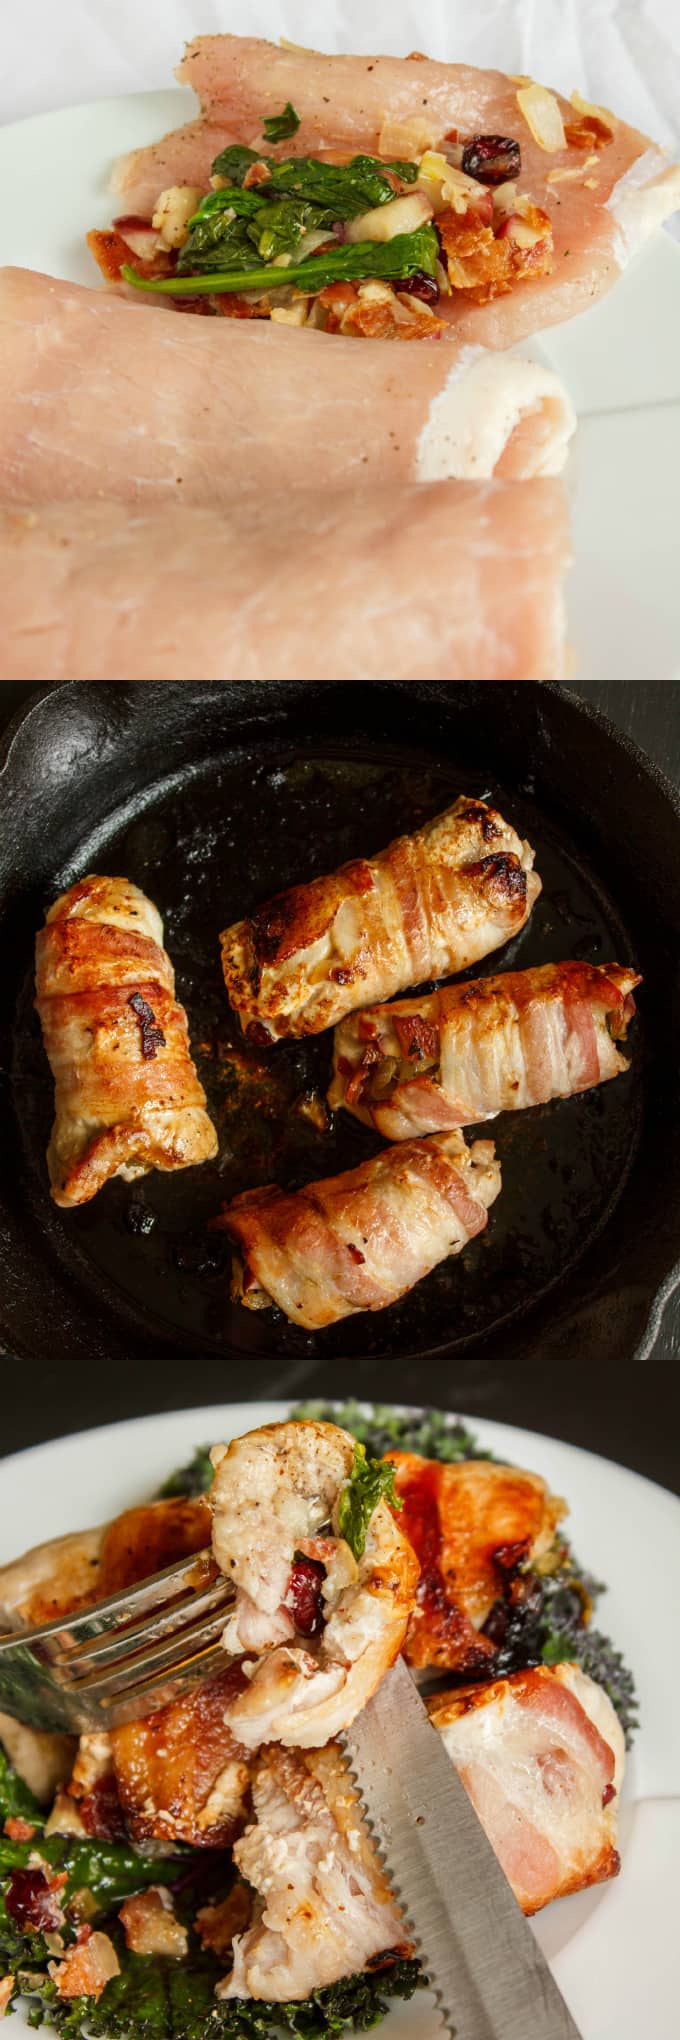 Boneless Pork Loin Chops Stuffed with Apple and Bacon  being stuffed, on pan, on white plate cutted by knife and picked by fork